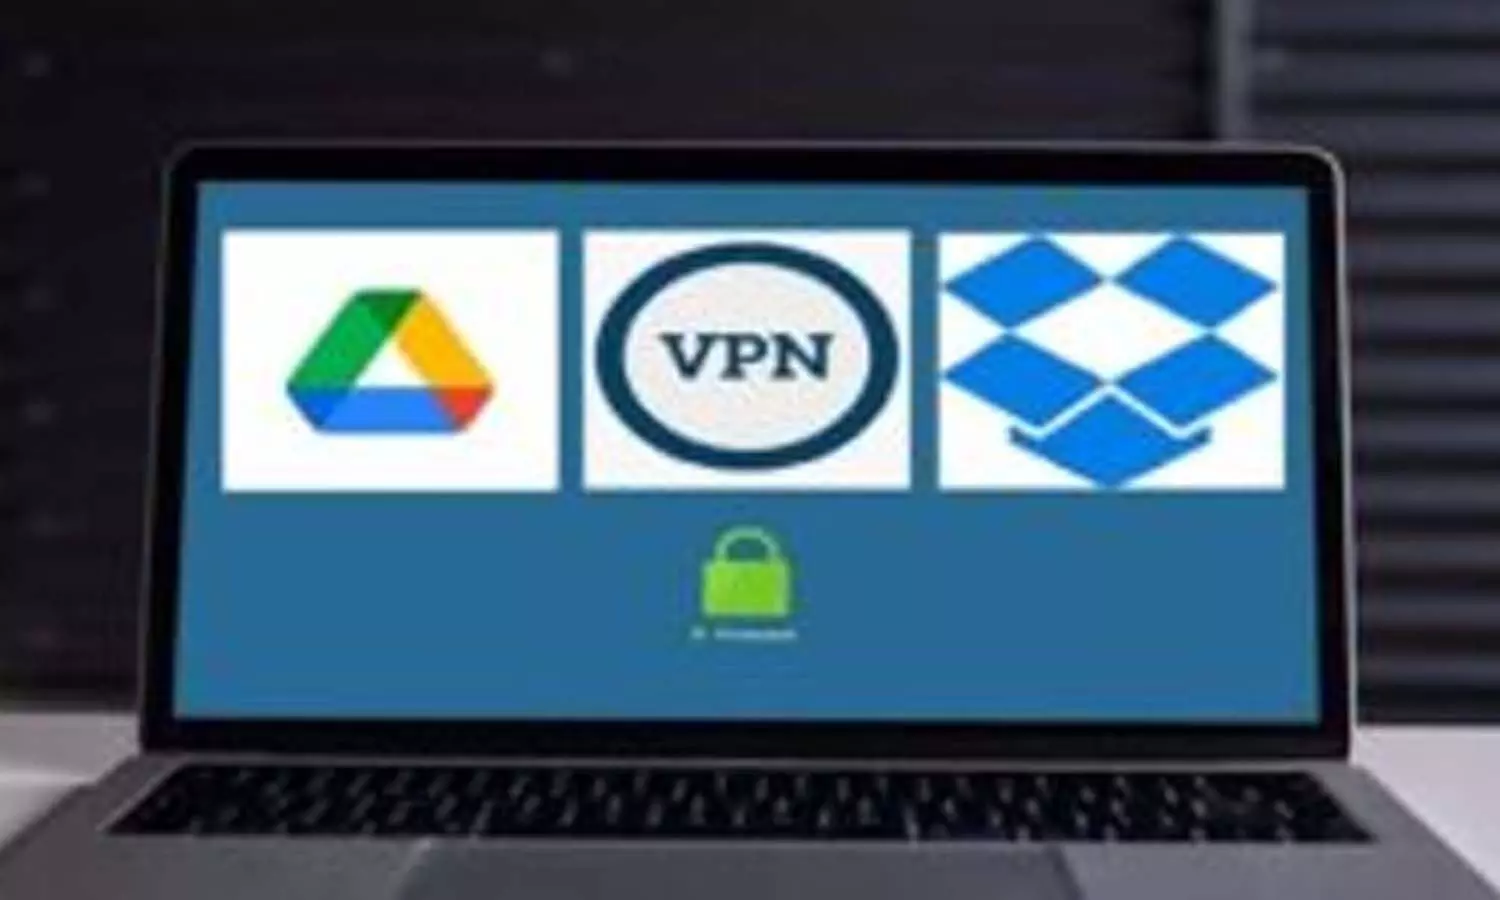 Know what is Dropbox, VPN and Drive which has been warned about